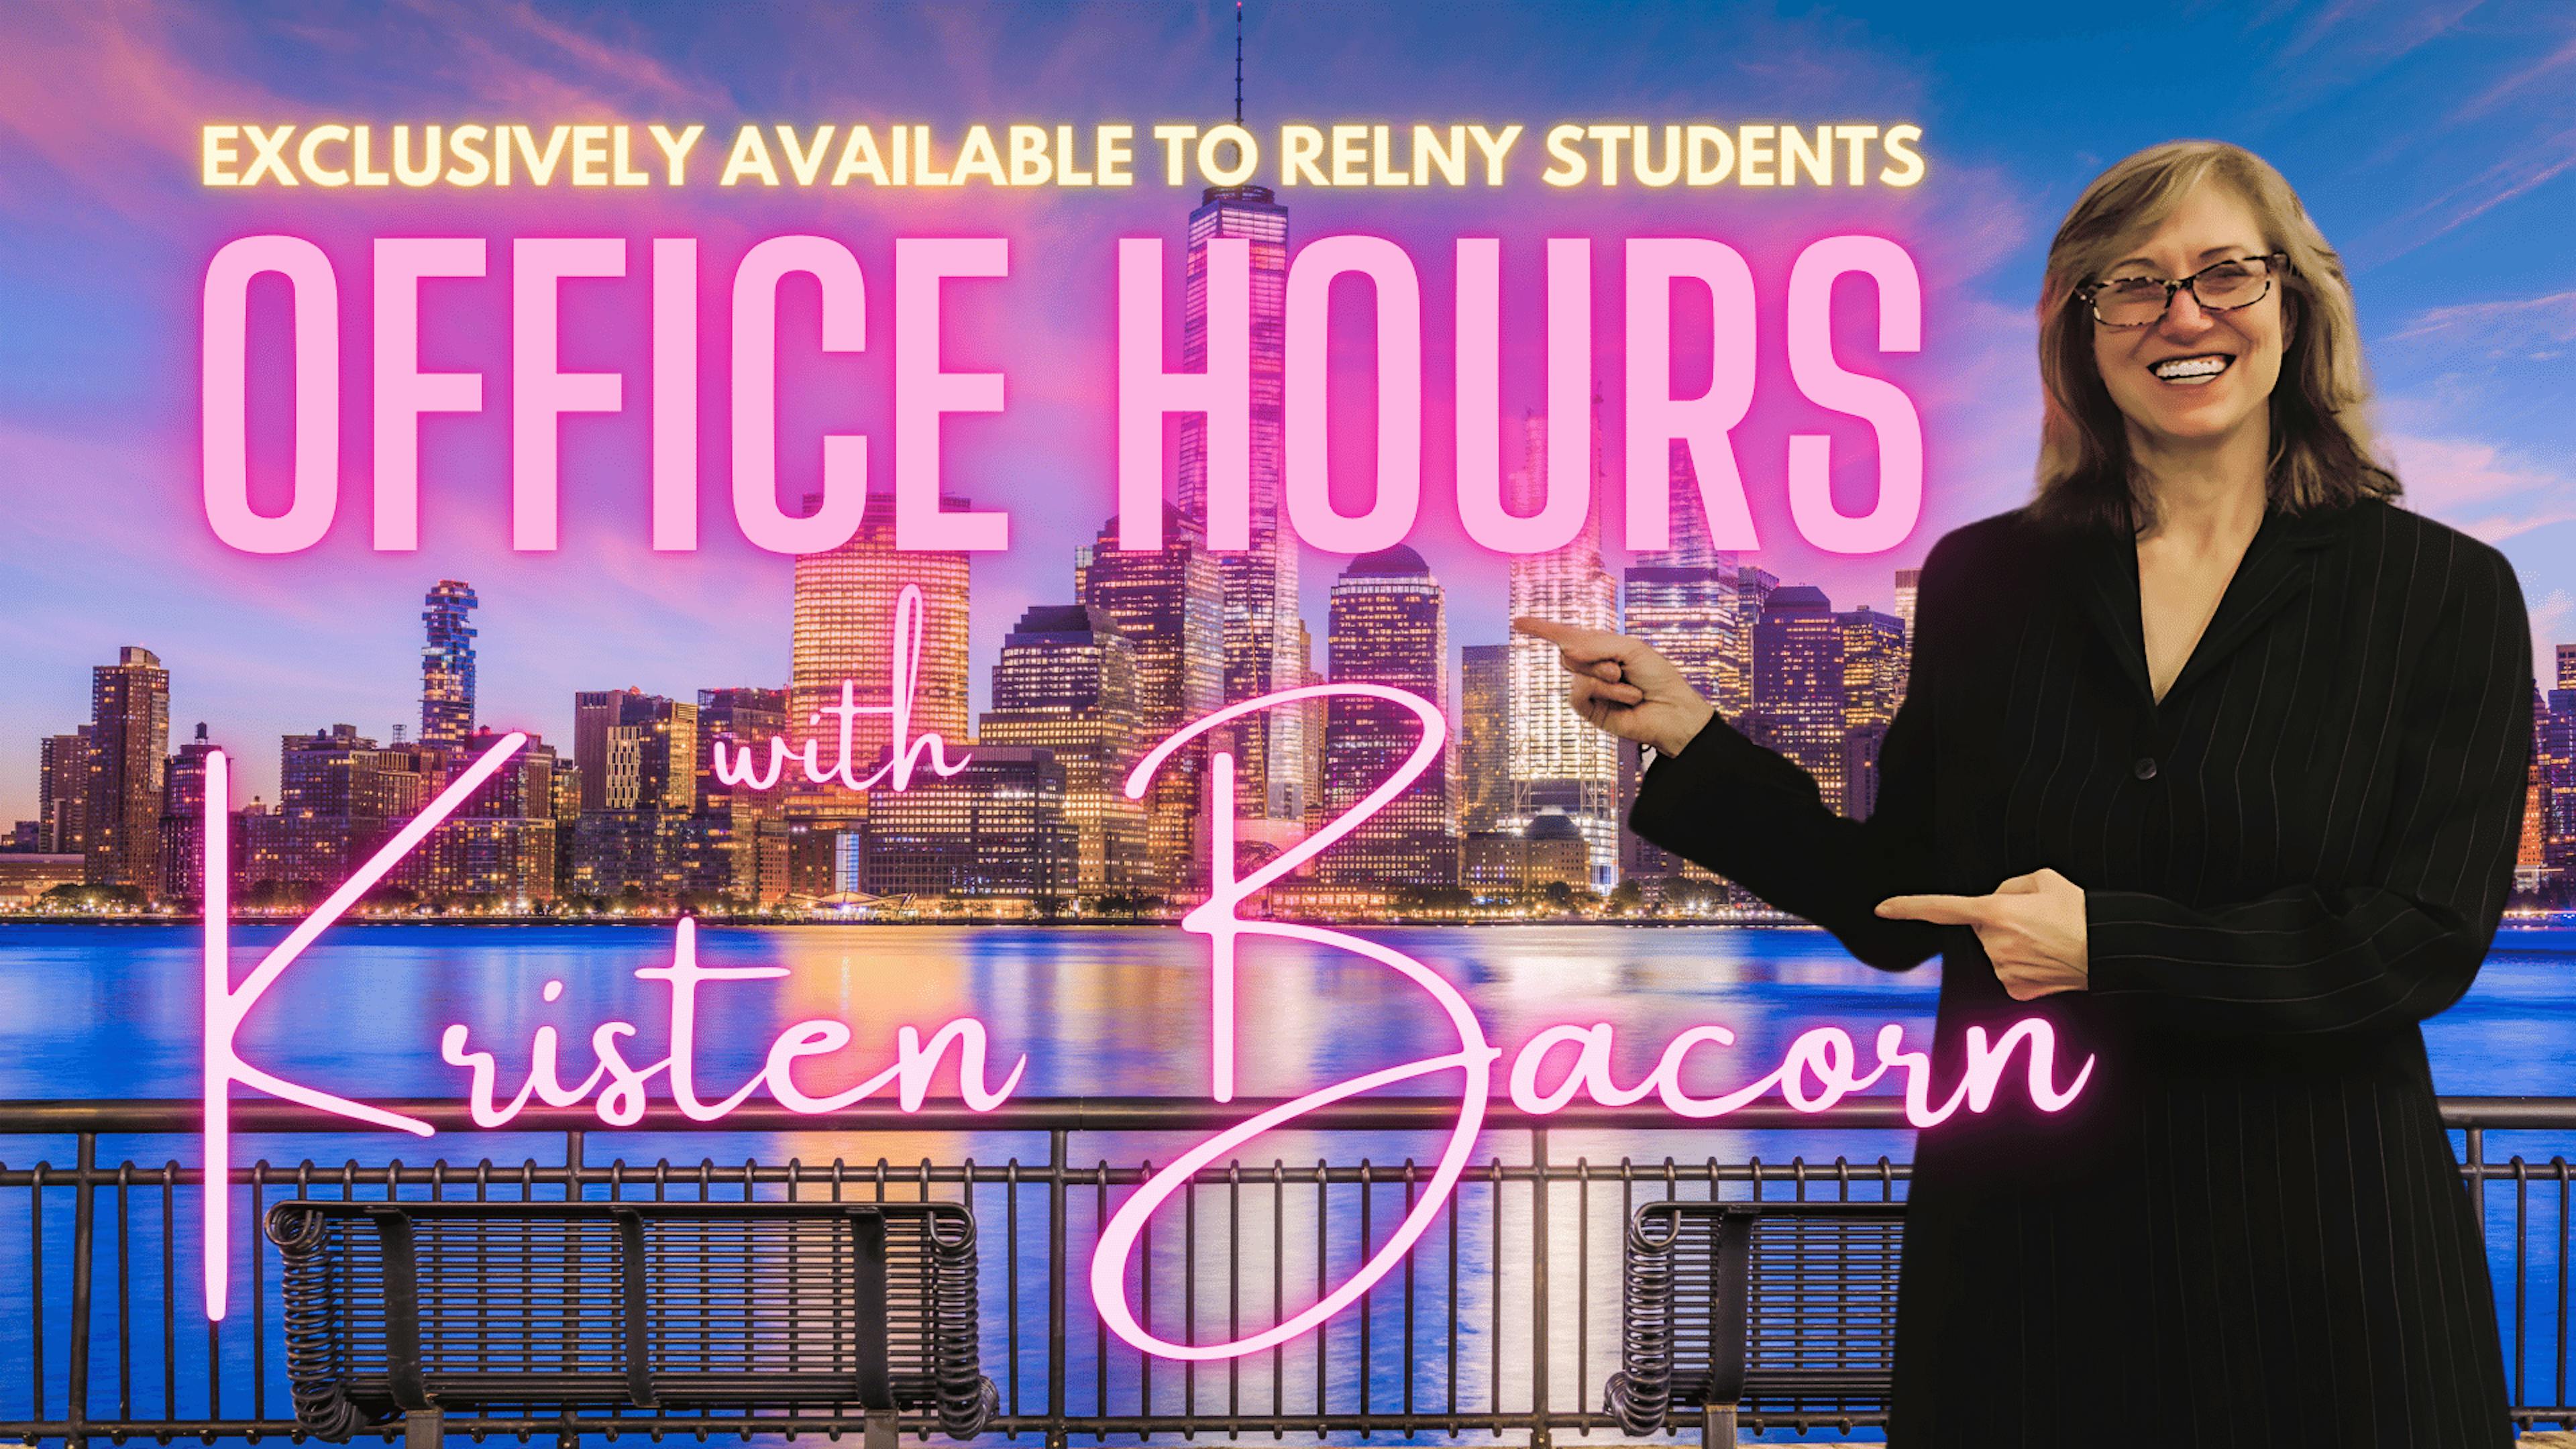 Exclusively Available to RELNY Students: Office Hours with Kristen Bacorn